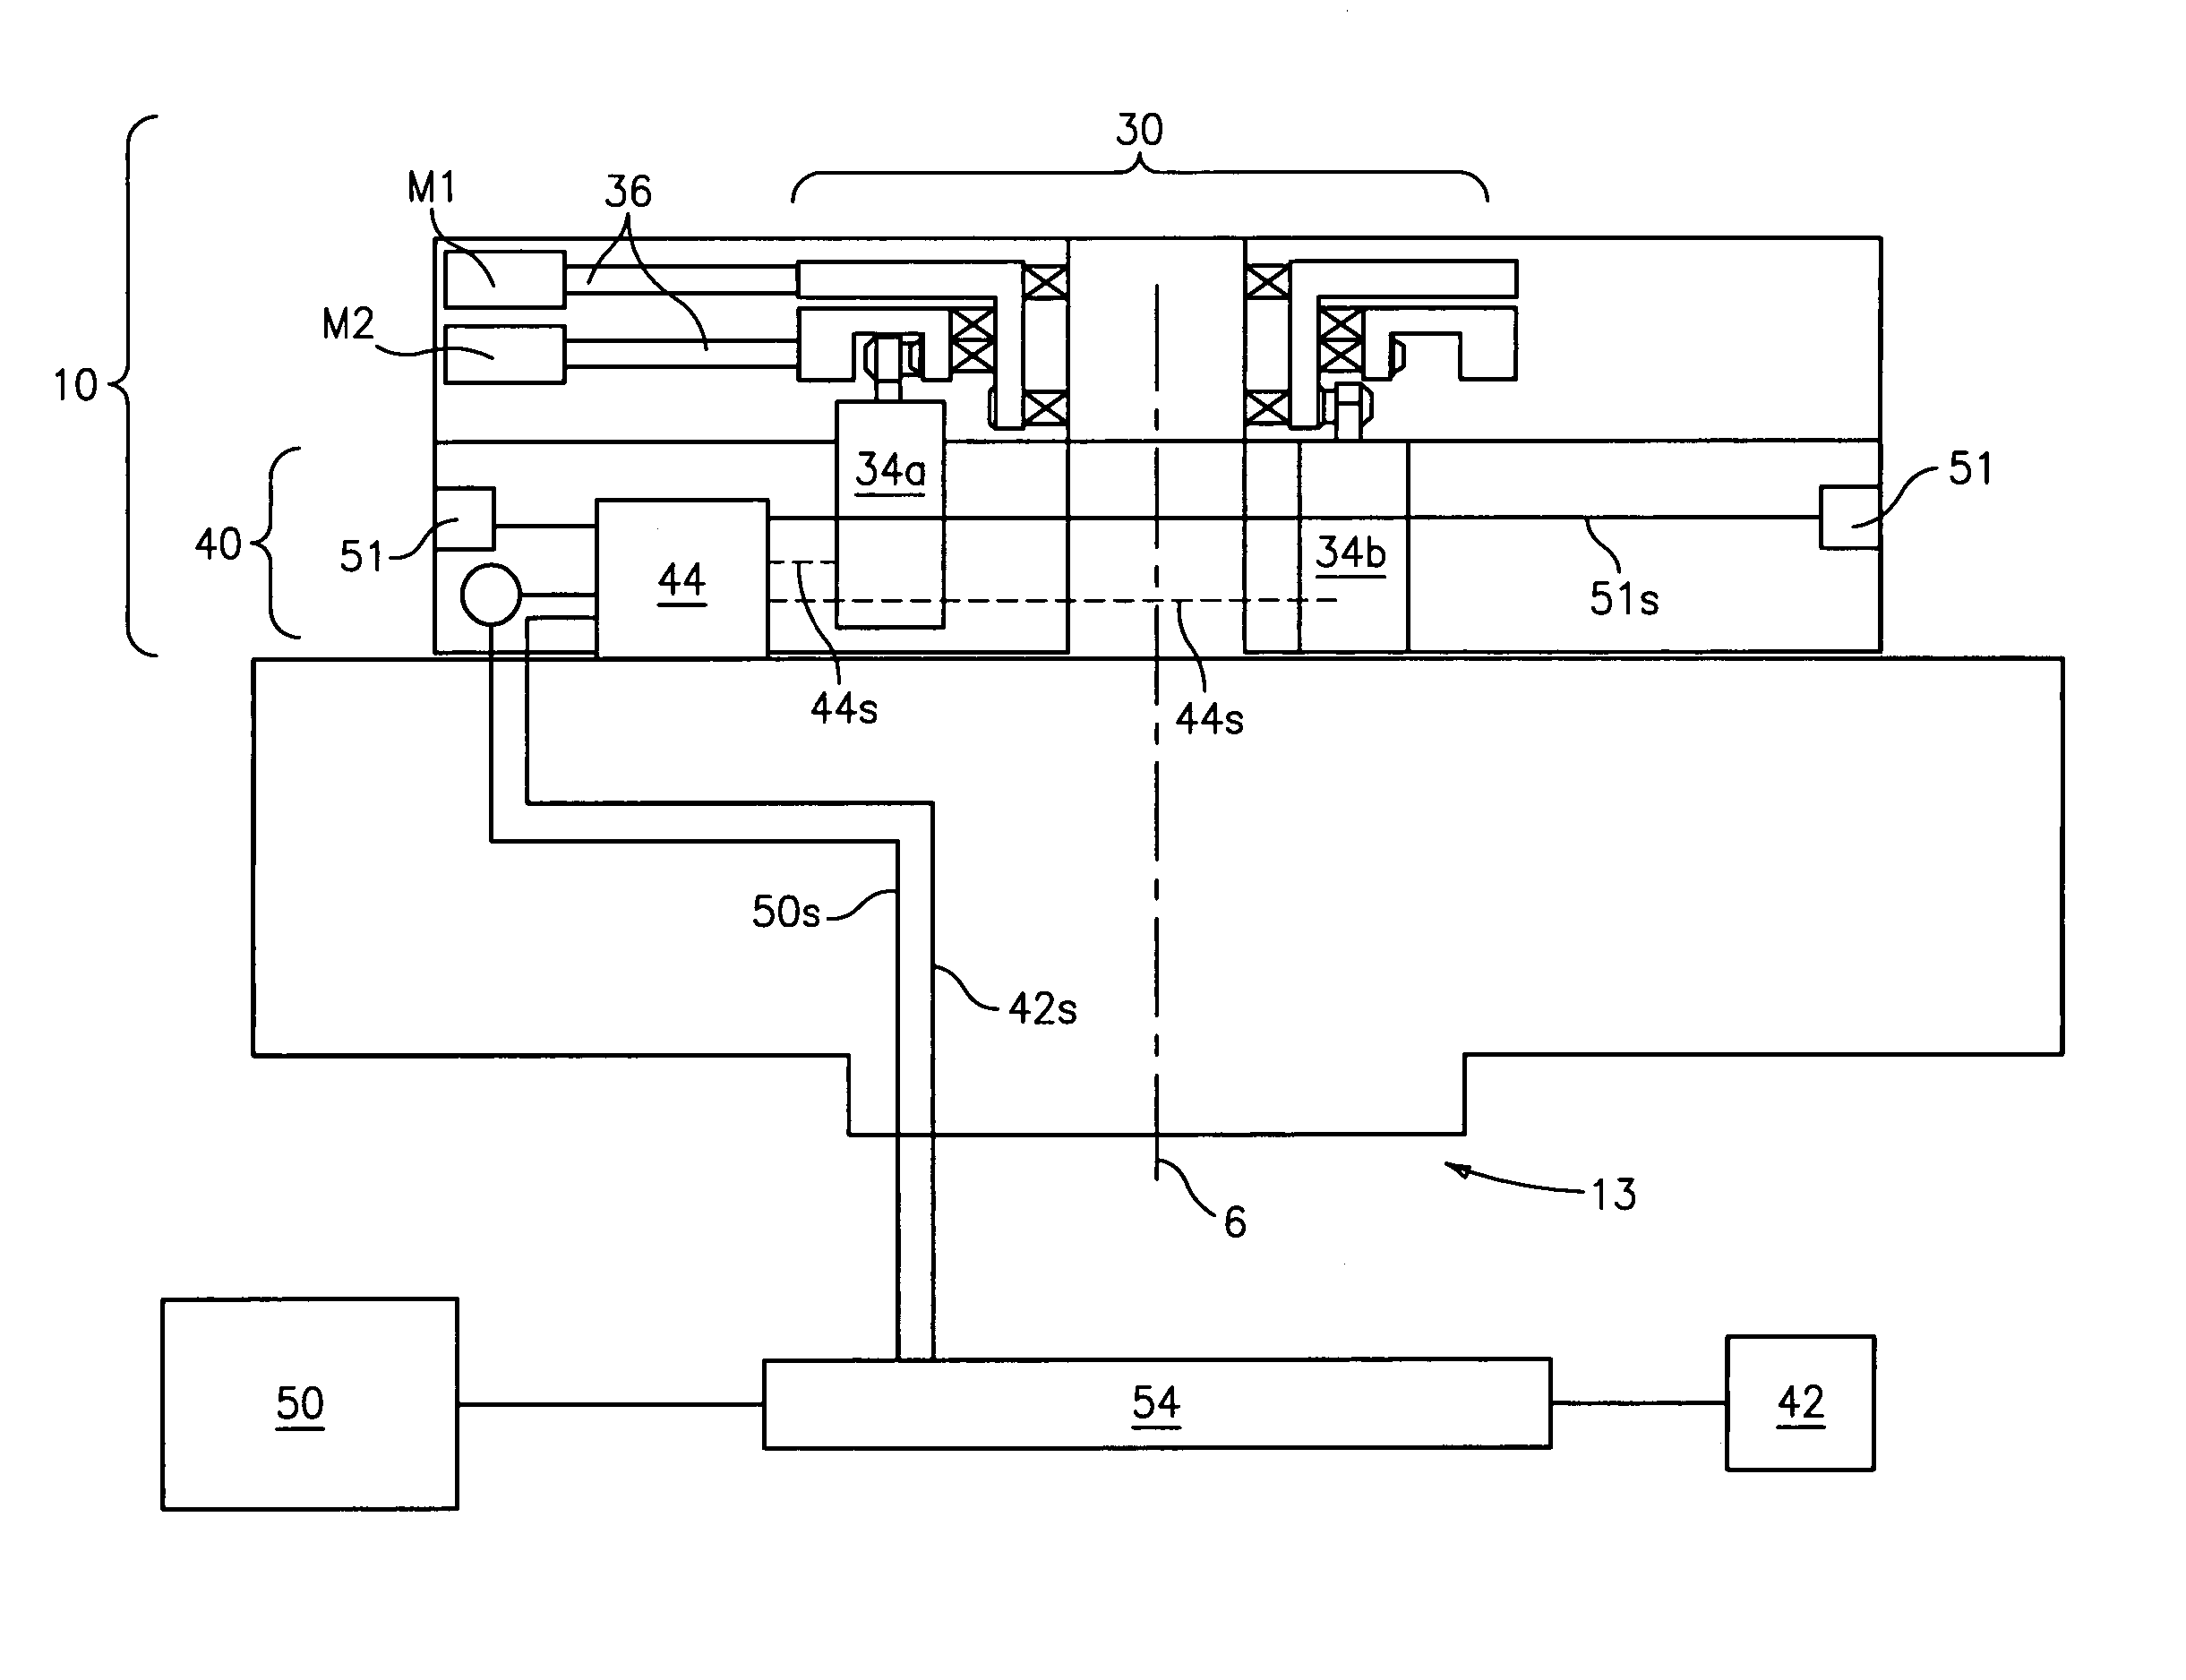 Active force generation system for minimizing vibration in a rotating system